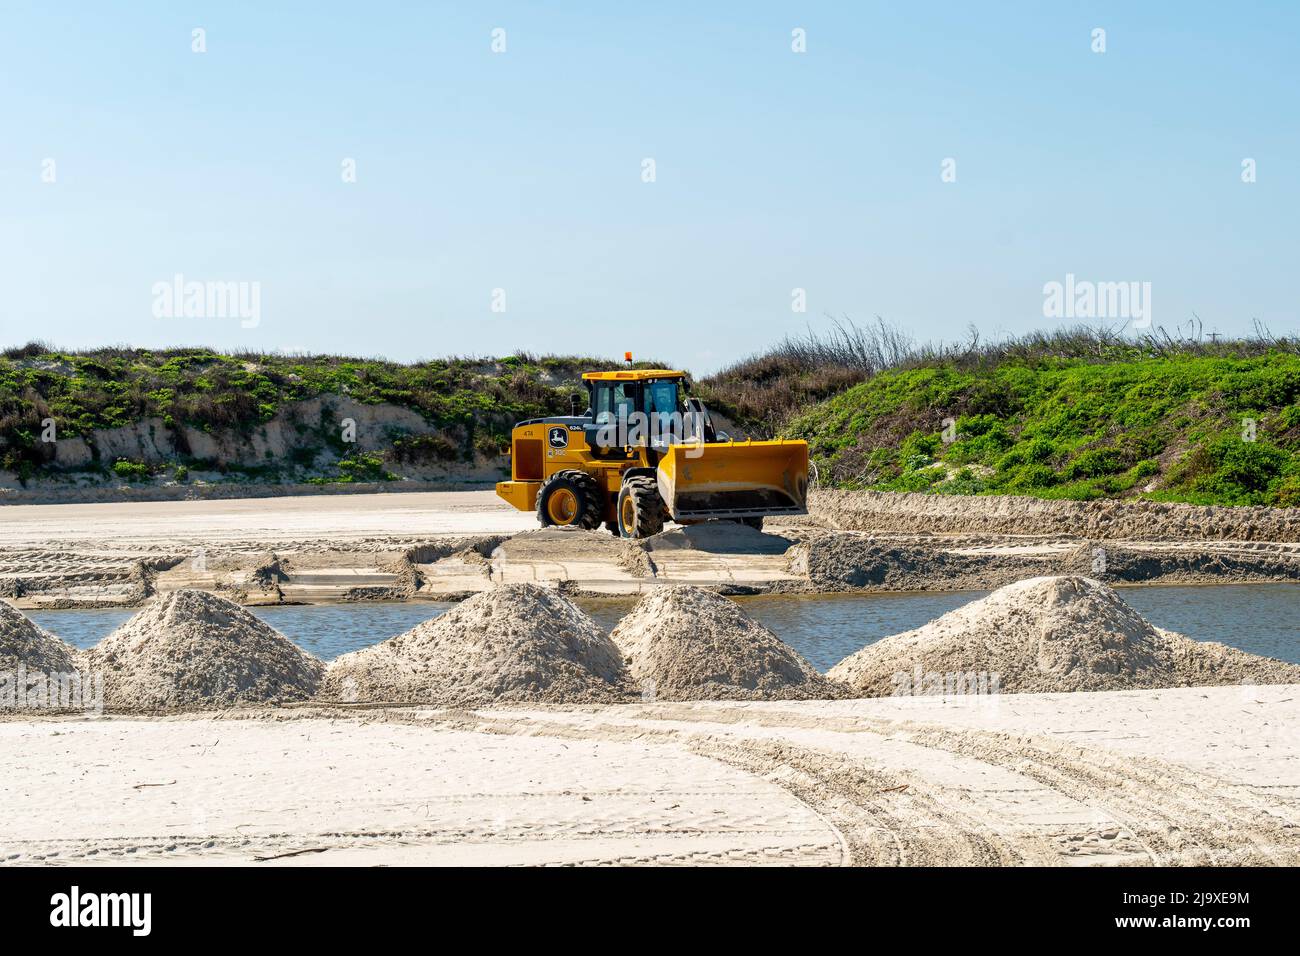 PORT ARANSAS, TX - 20200213: Caterpillar front end loader leveling sand piles around a pond, as part of a repair project after Hurricane Harvey at the Stock Photo